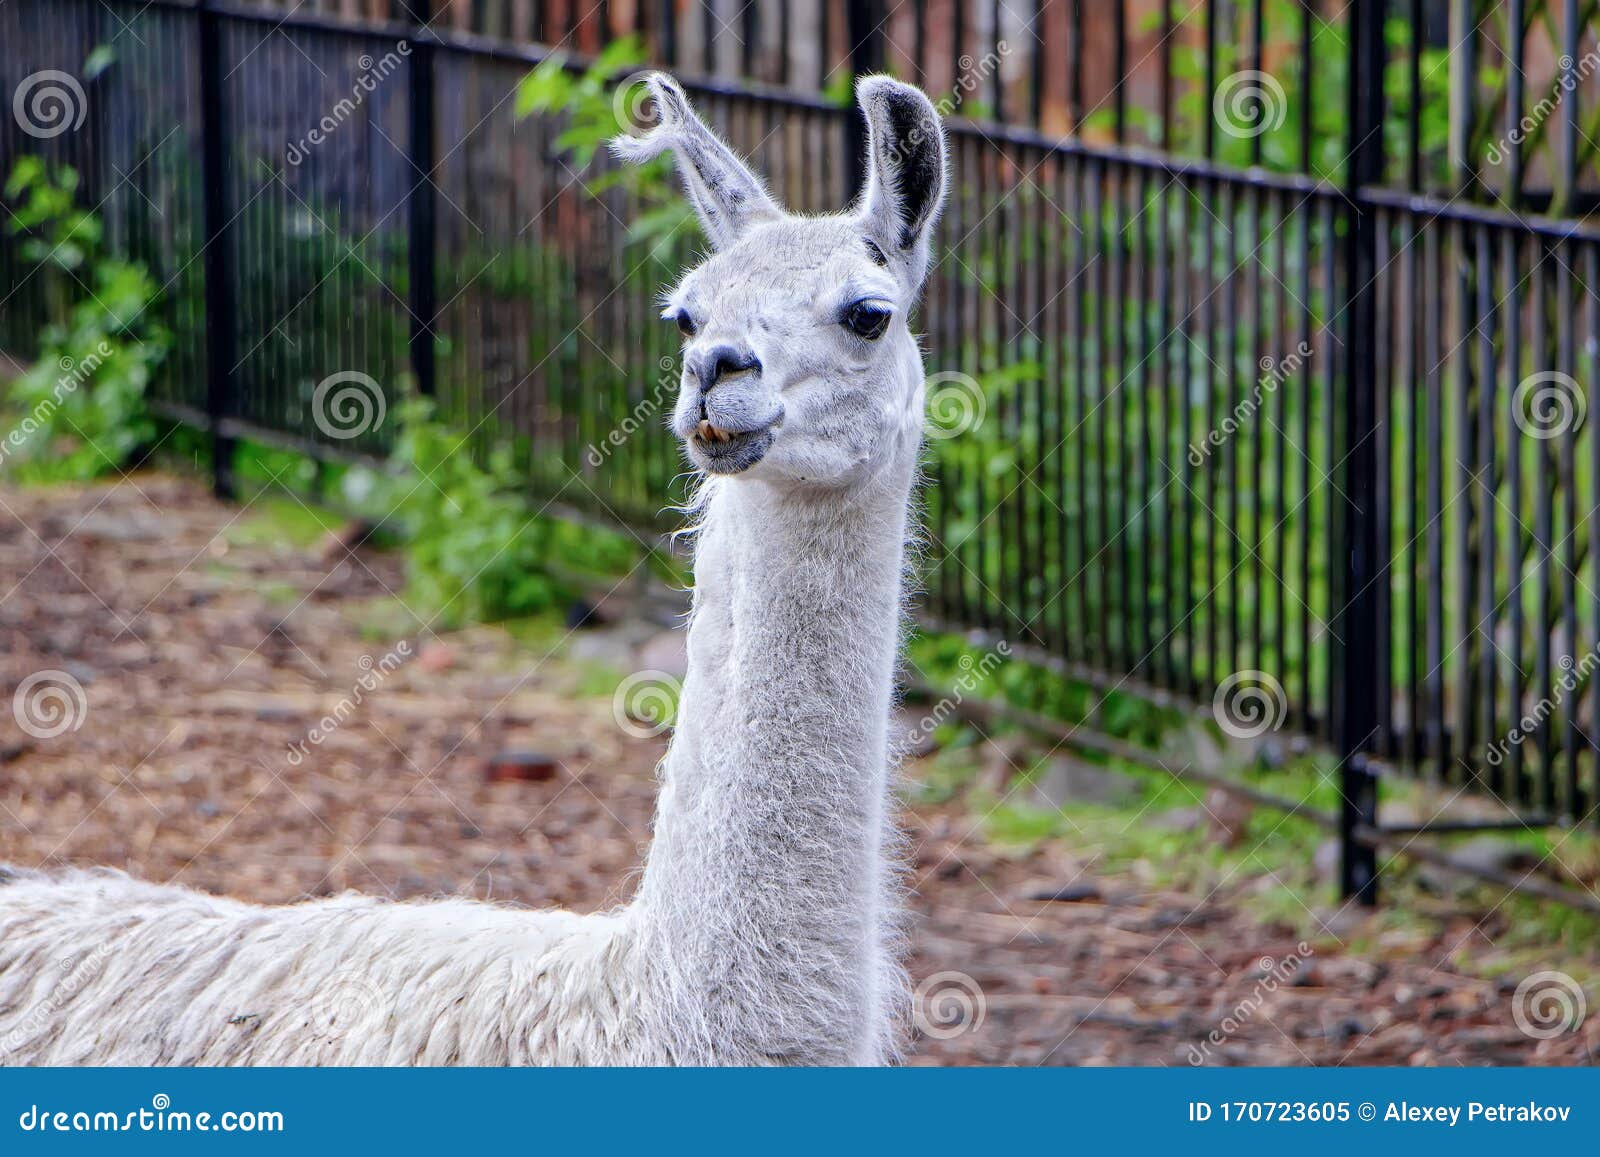 Lama with a Long Neck on the Background of the Fence in the Zoo Stock Image  - Image of zoological, fauna: 170723605